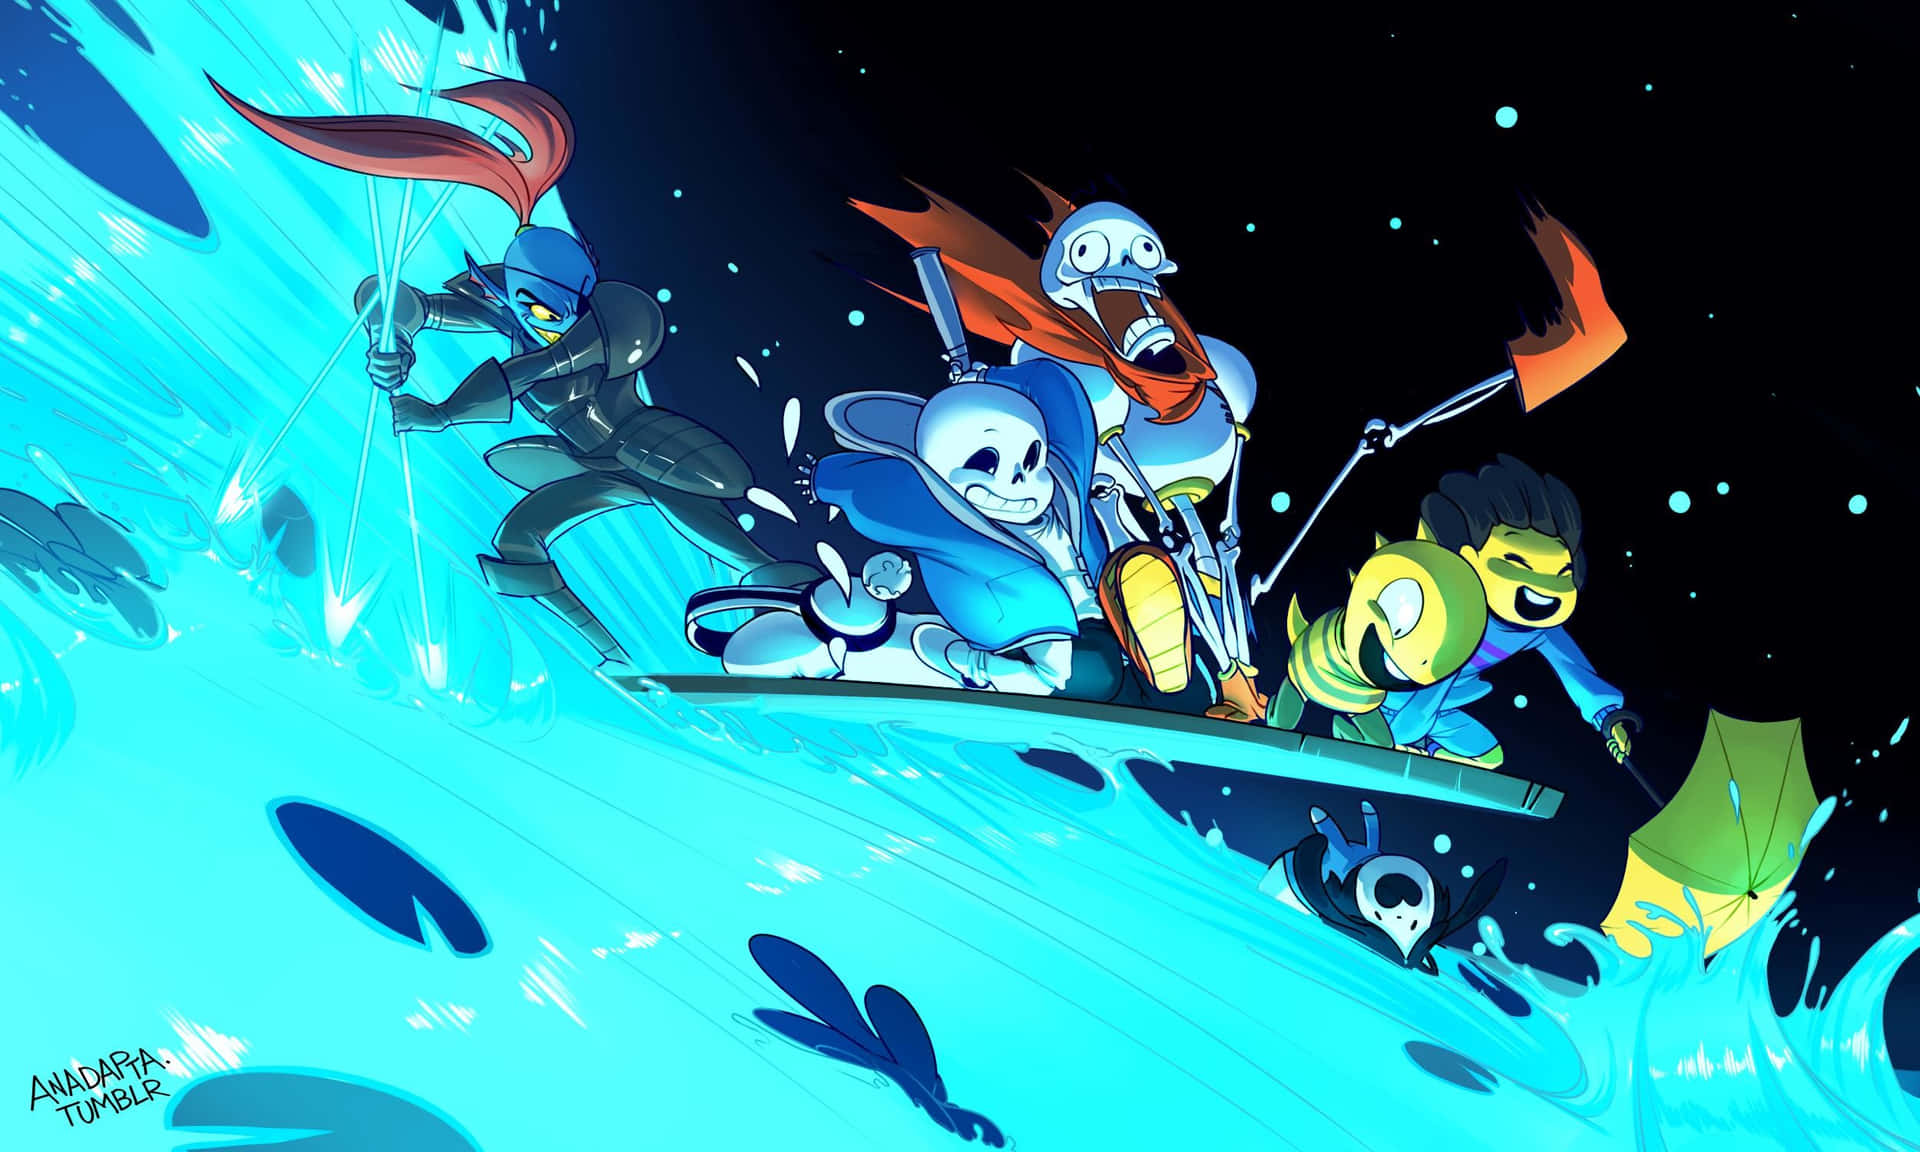 "New Challenges Awaiting – Sans from the Video Game Undertale" Wallpaper